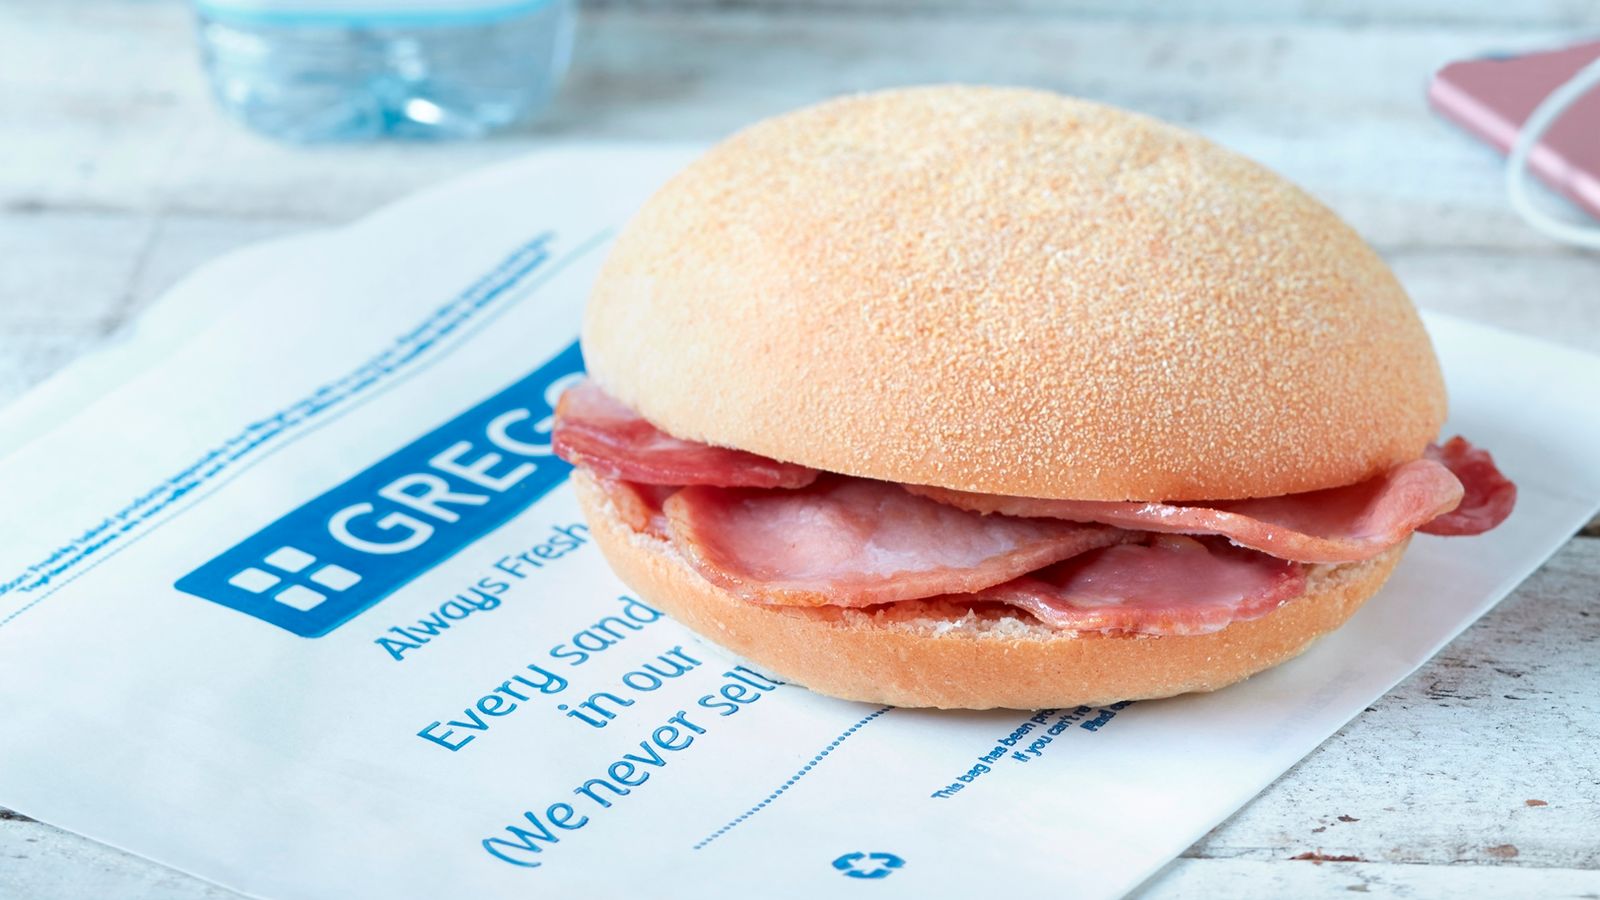 Free bacon butties on offer as rail companies try to get commuters back on trains - Sky News